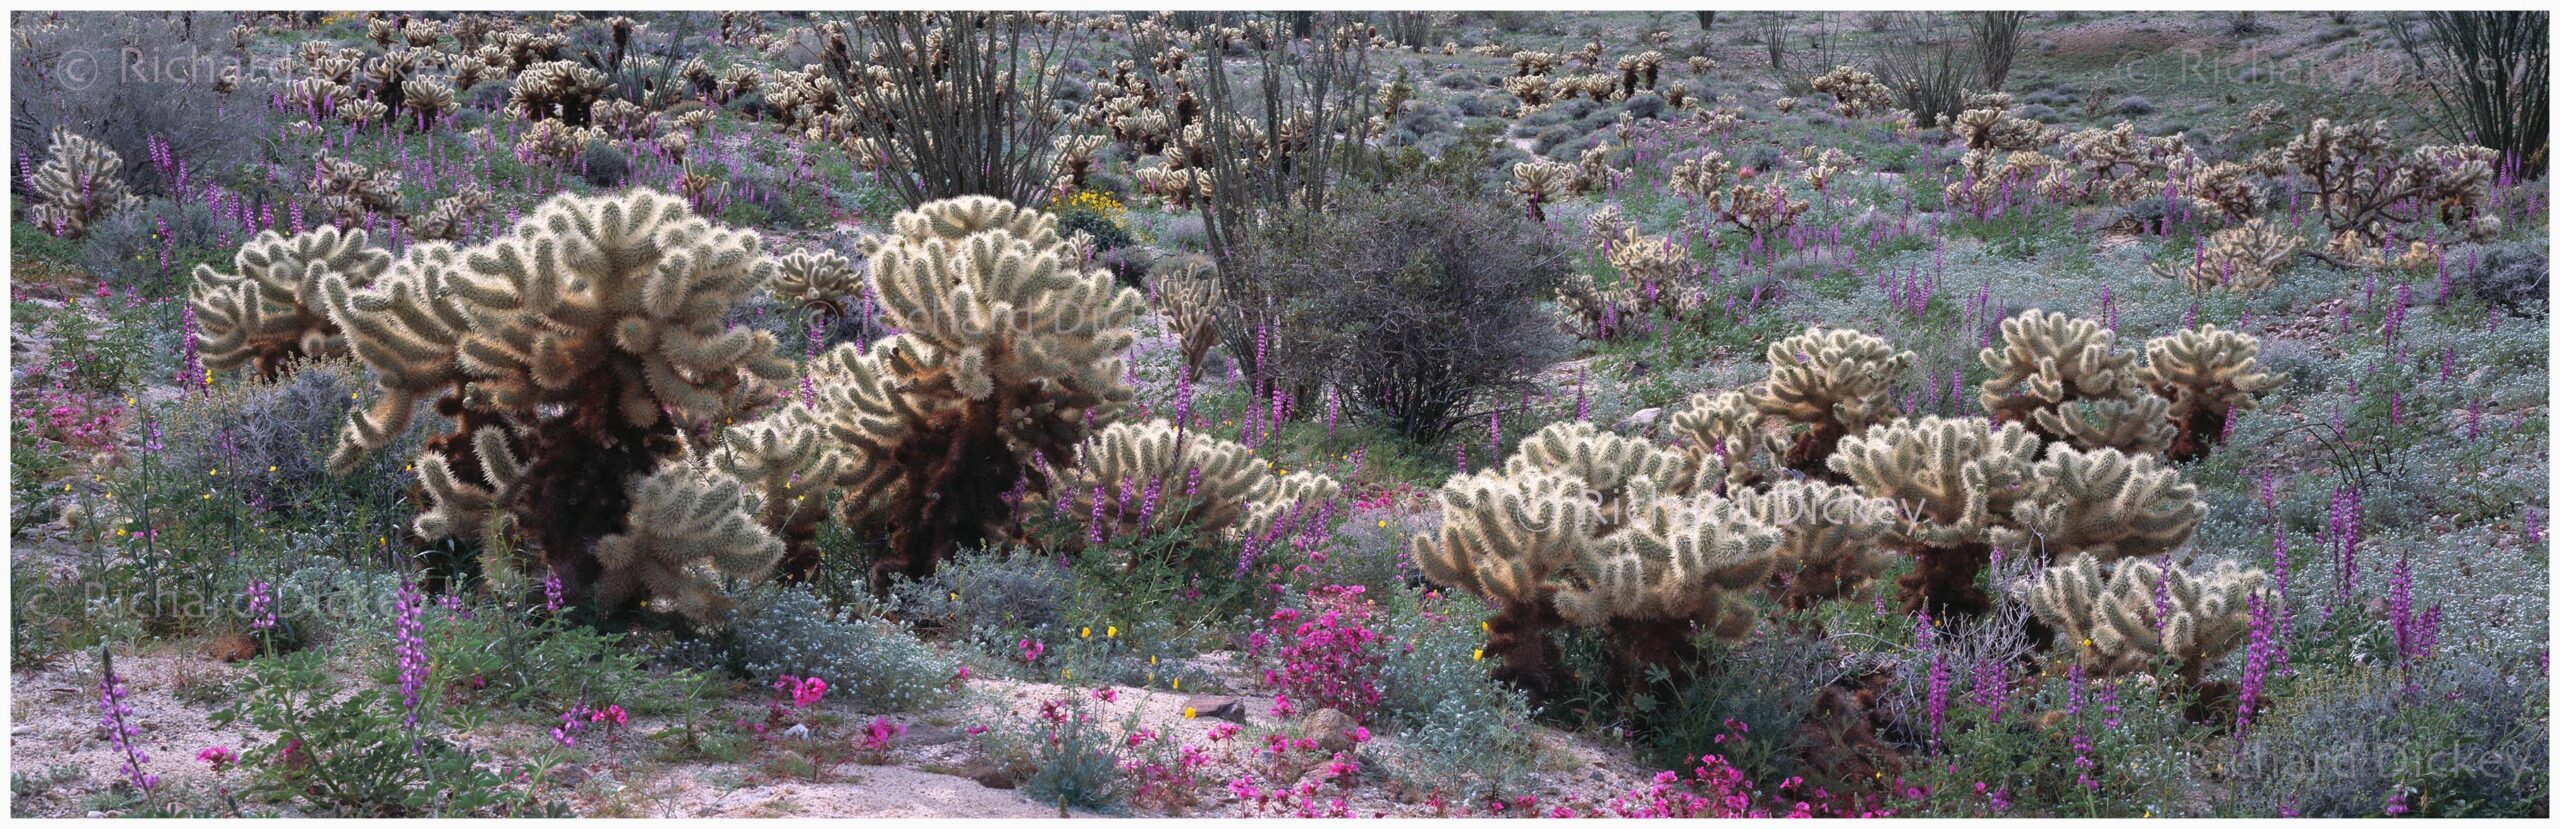 Colorful wildflower garden amongst prickly cholla cactus in Anza Borrego State Park CA.